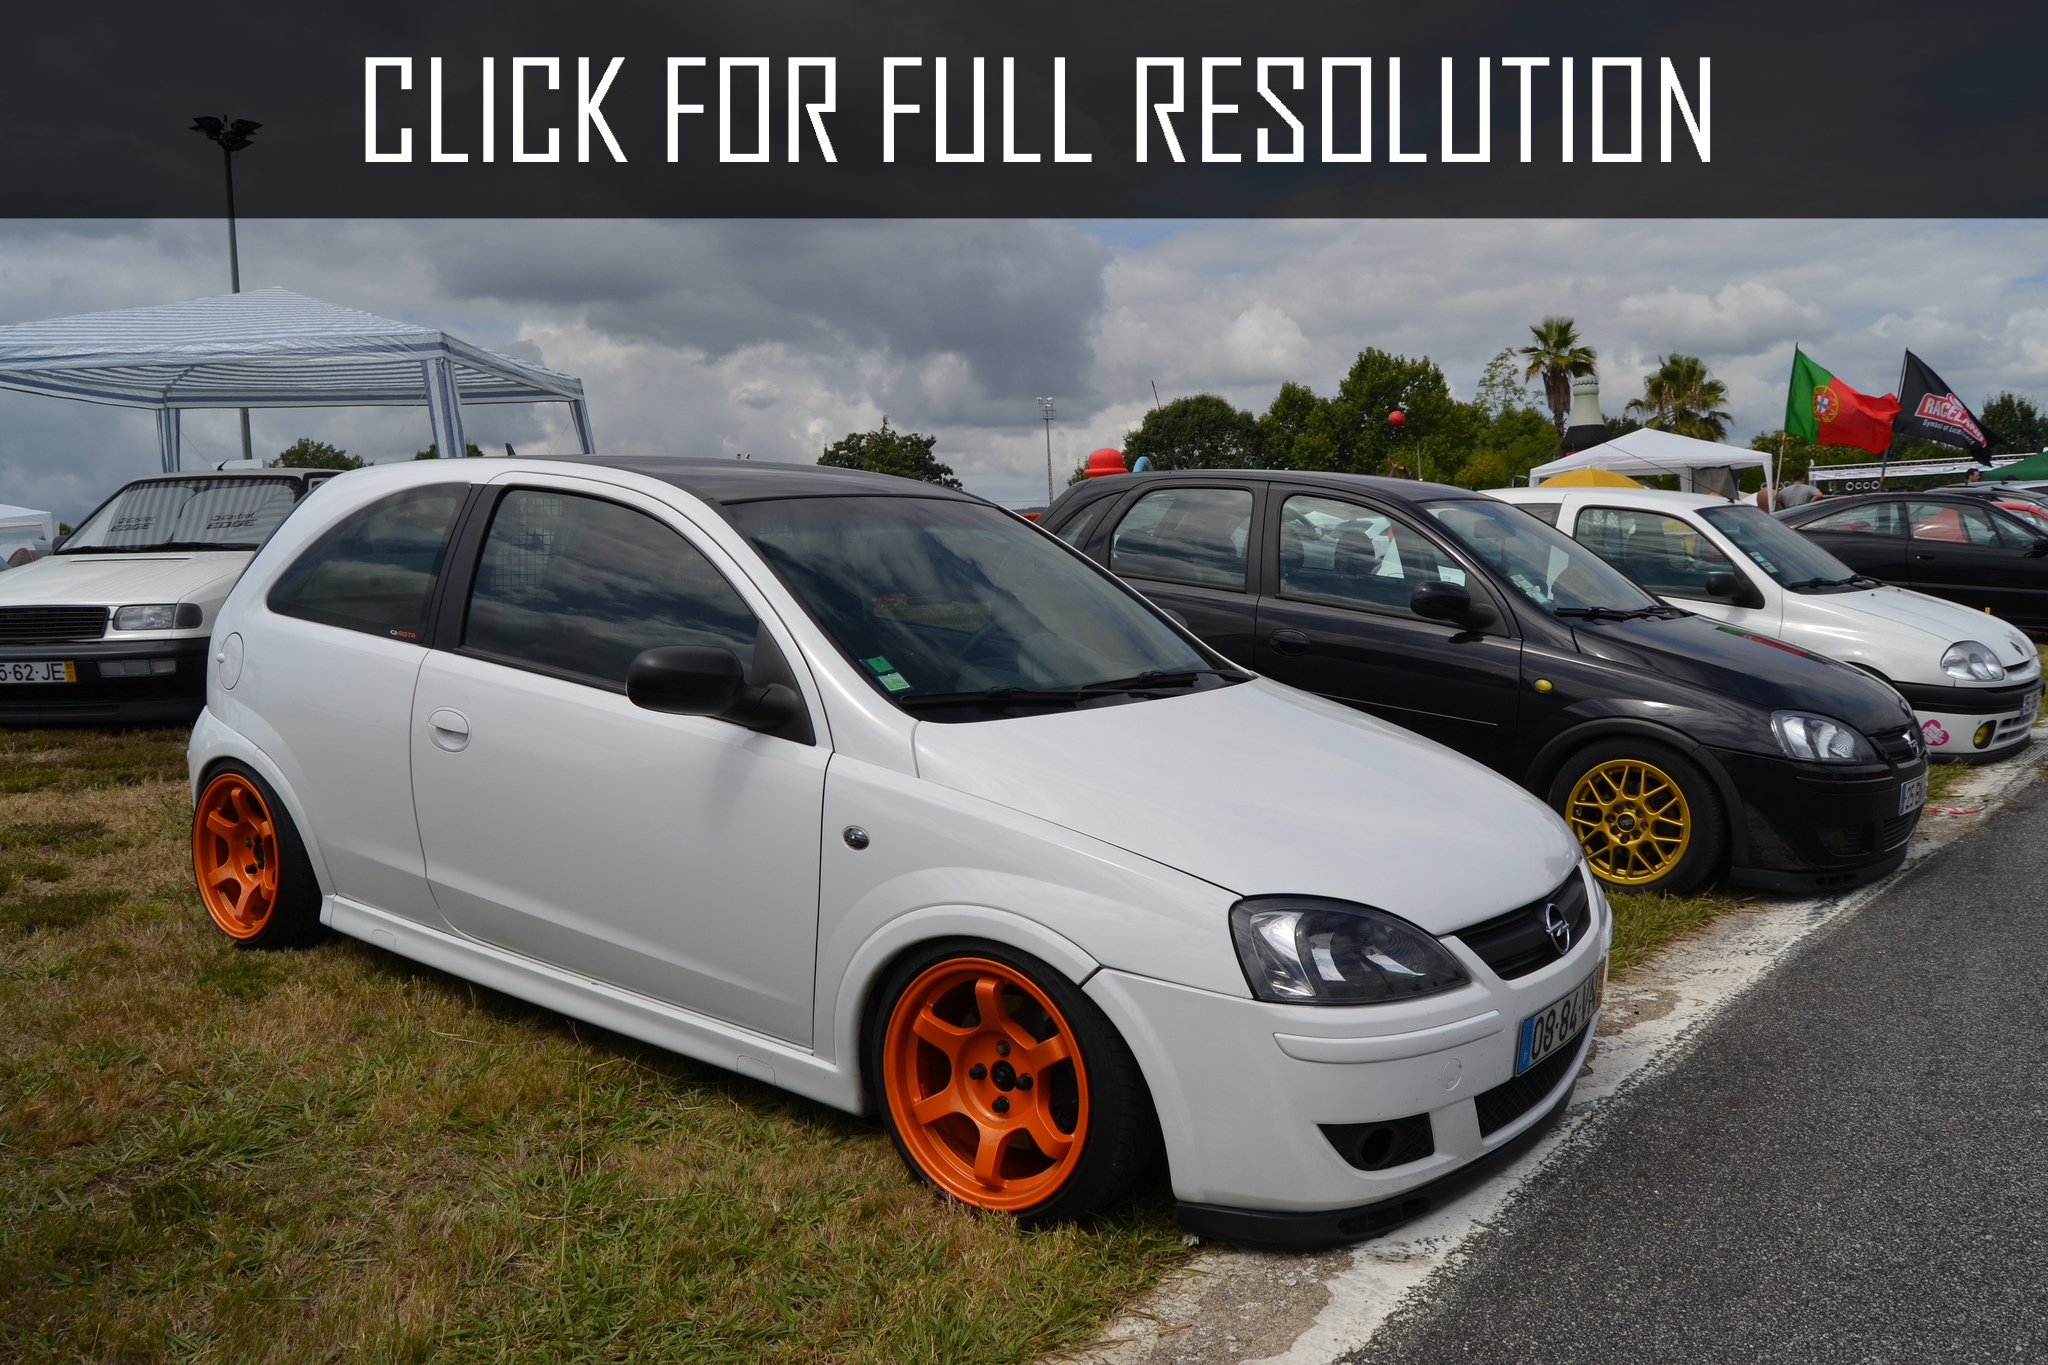 Chevrolet Corsa Tuning amazing photo gallery, some